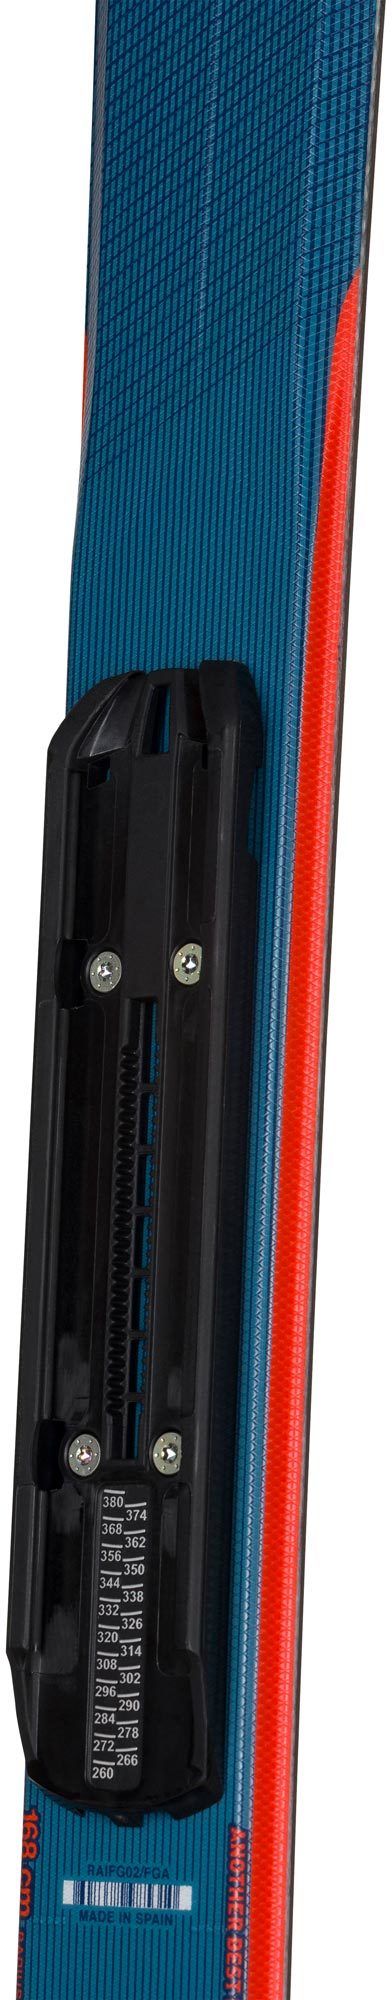 SKIS ROSSIGNOL MEN'S ALL MOUNTAIN SKIS EXPERIENCE 74 -XPRESS 2 BINDINGS - Alleydesigns  Pty Ltd                                             ABN: 44165571264